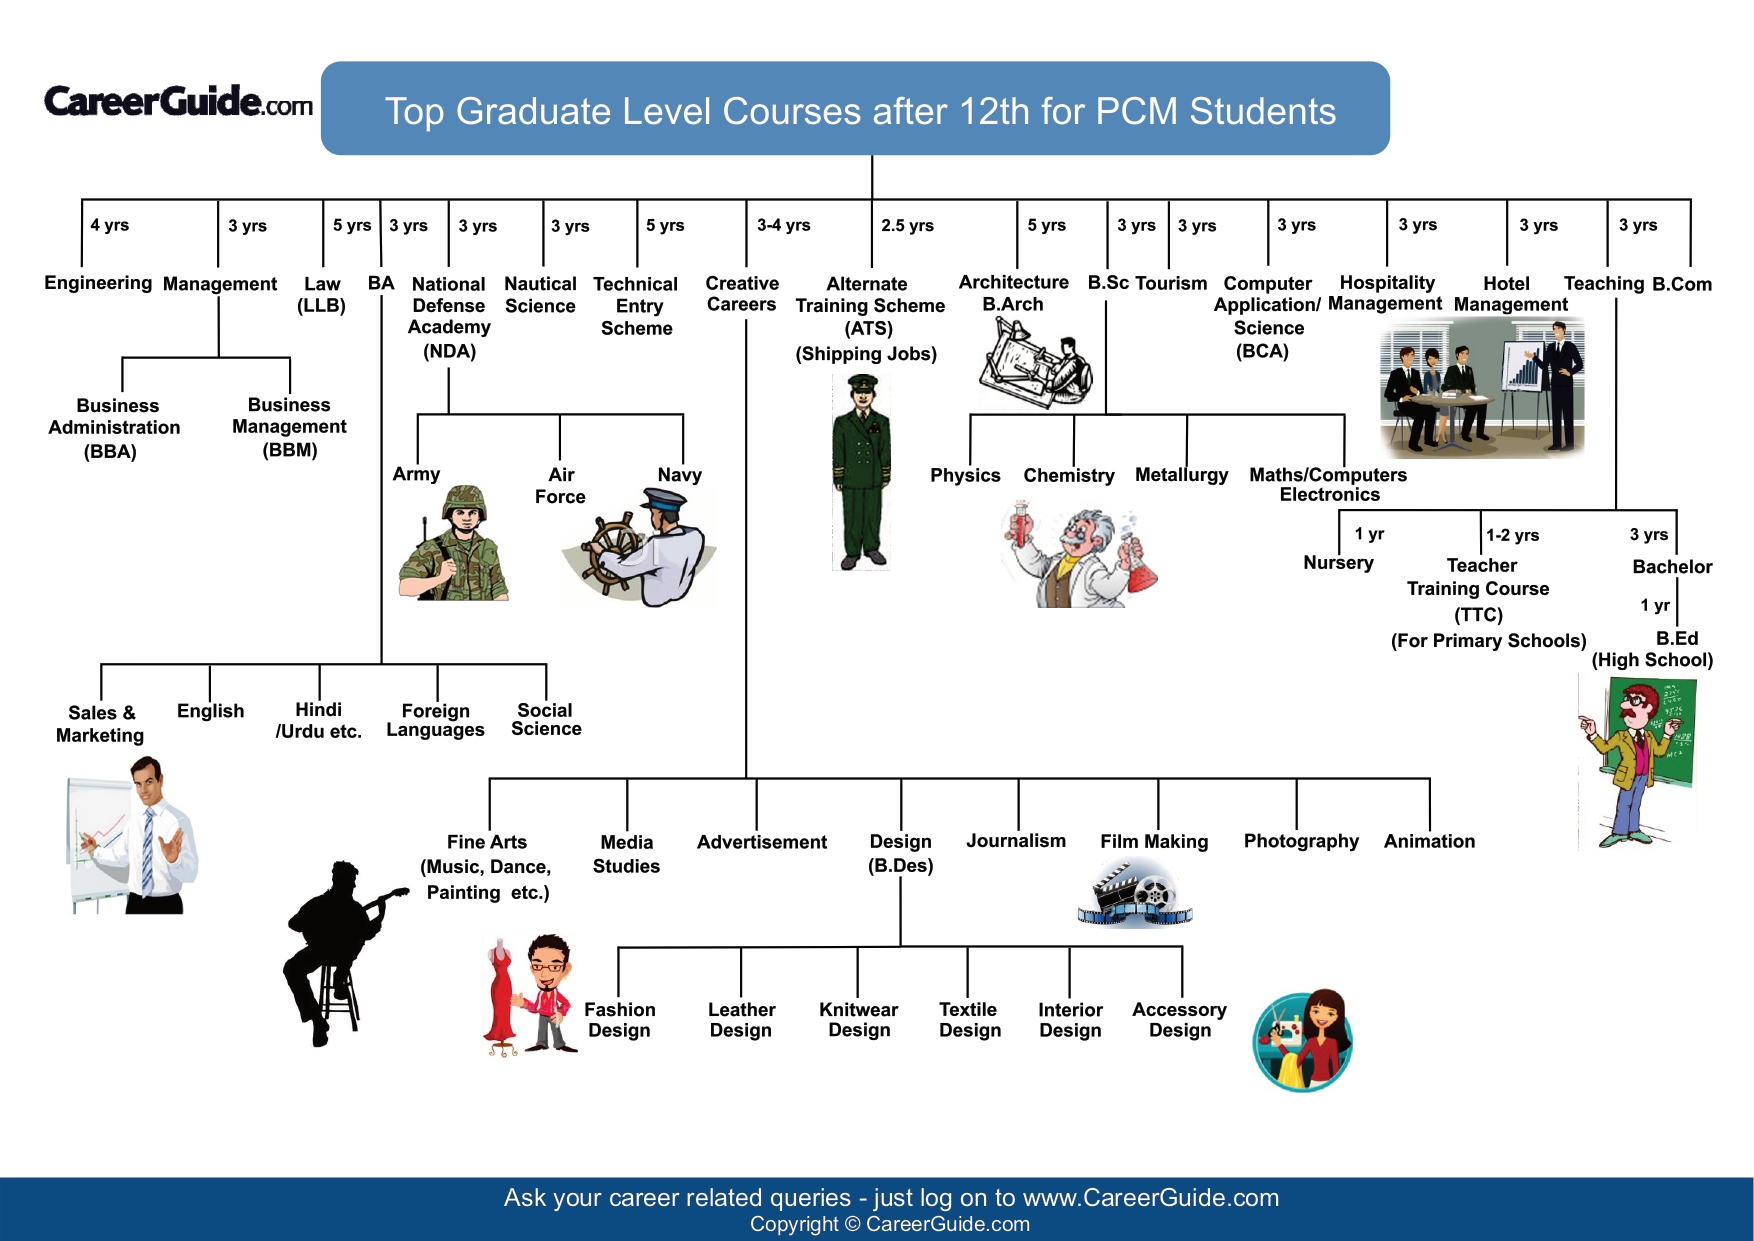 Career Guidance for PCM Students